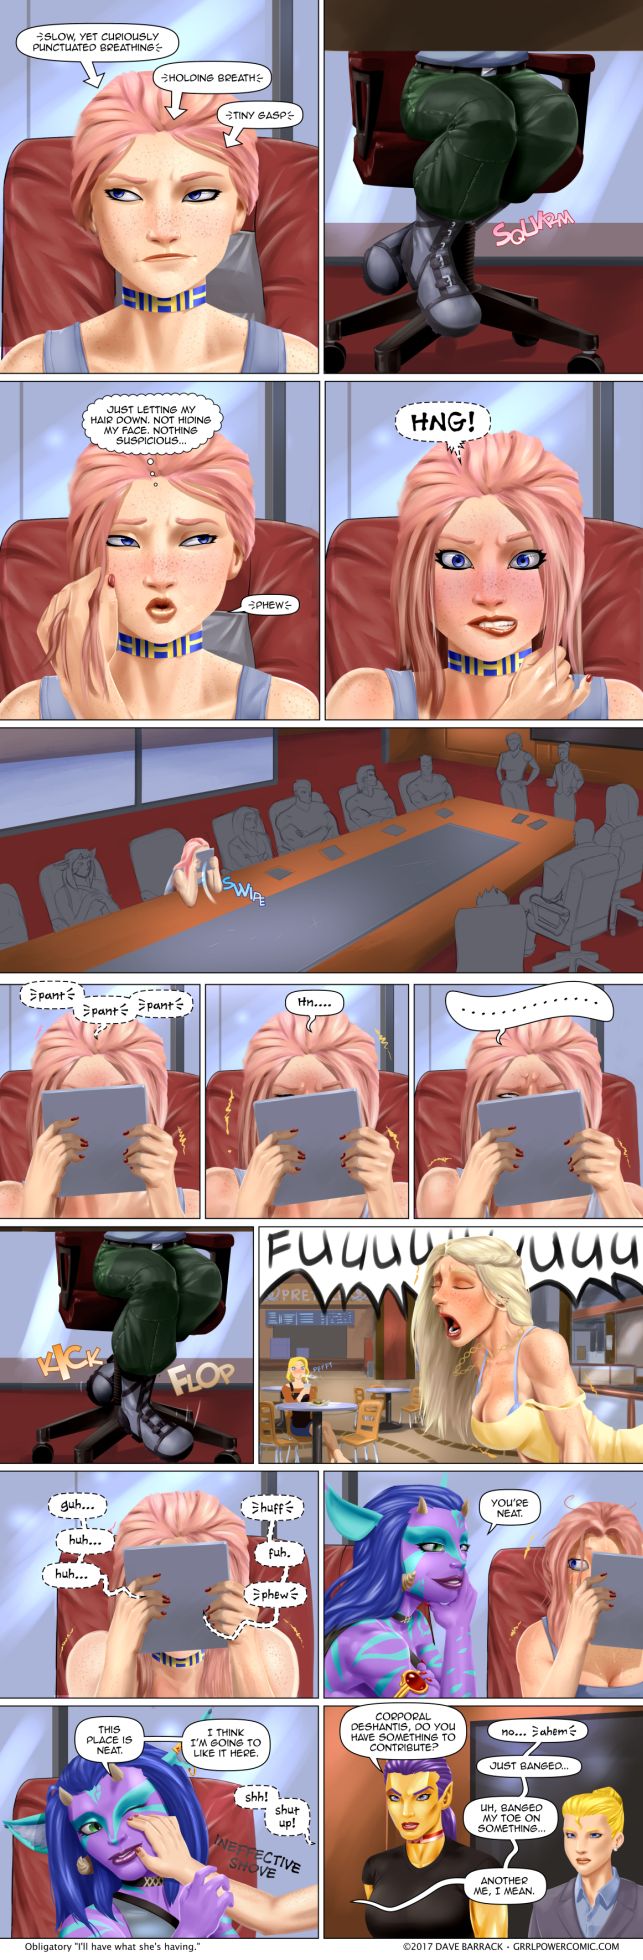 Grrl Power #606 – Boring meeting? Try orgasms why not?